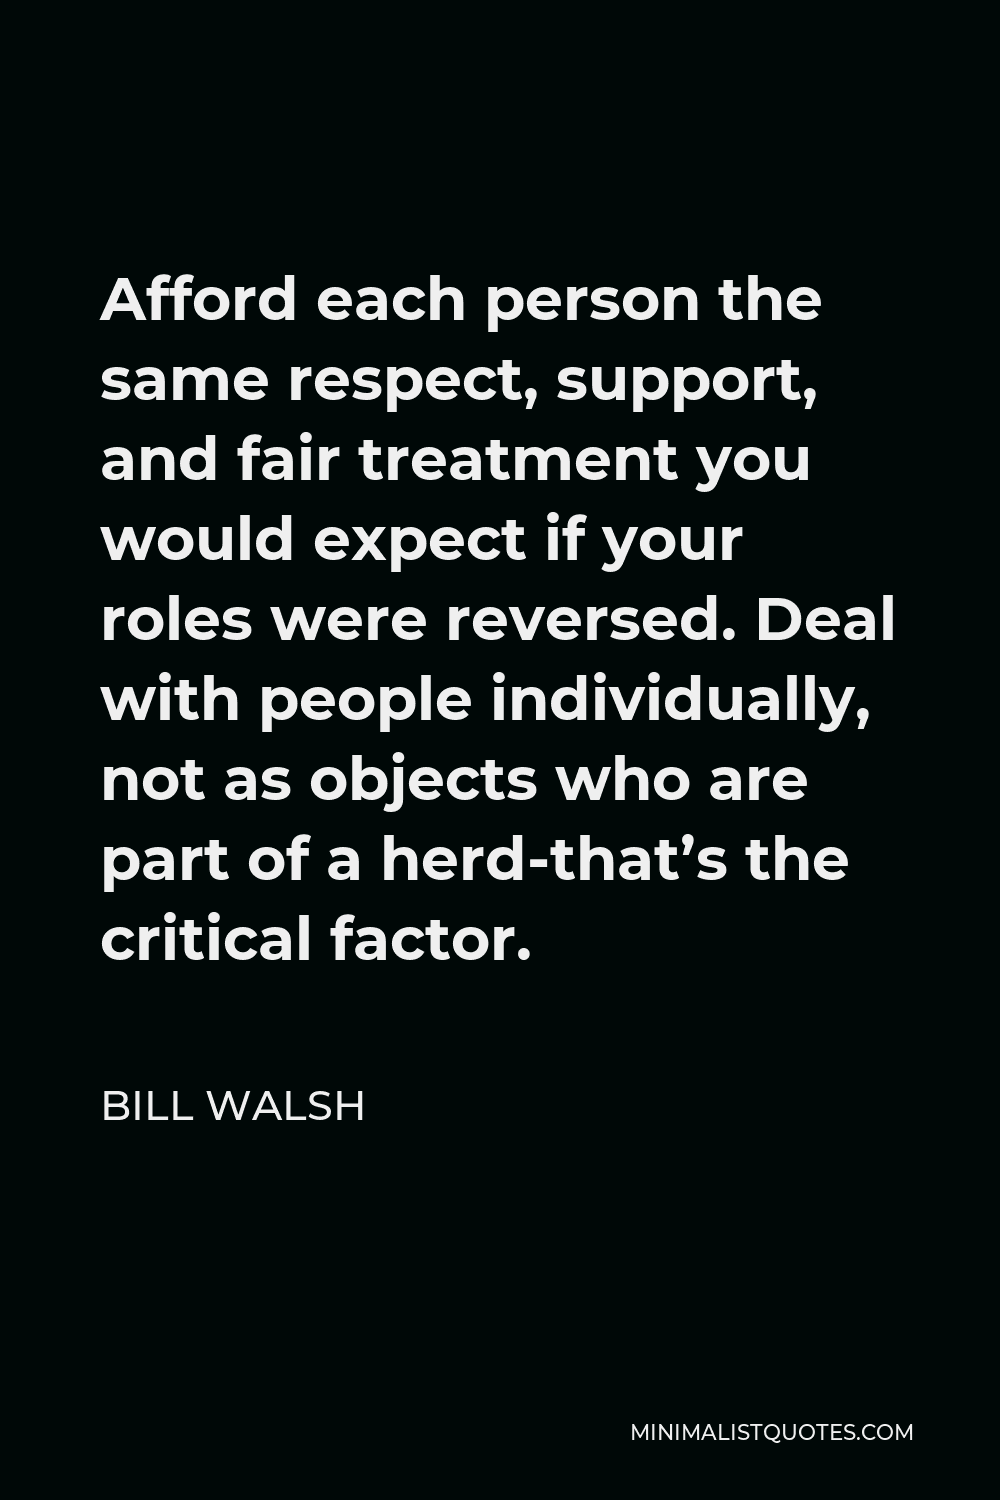 Bill Walsh Quote - Afford each person the same respect, support, and fair treatment you would expect if your roles were reversed. Deal with people individually, not as objects who are part of a herd-that’s the critical factor.